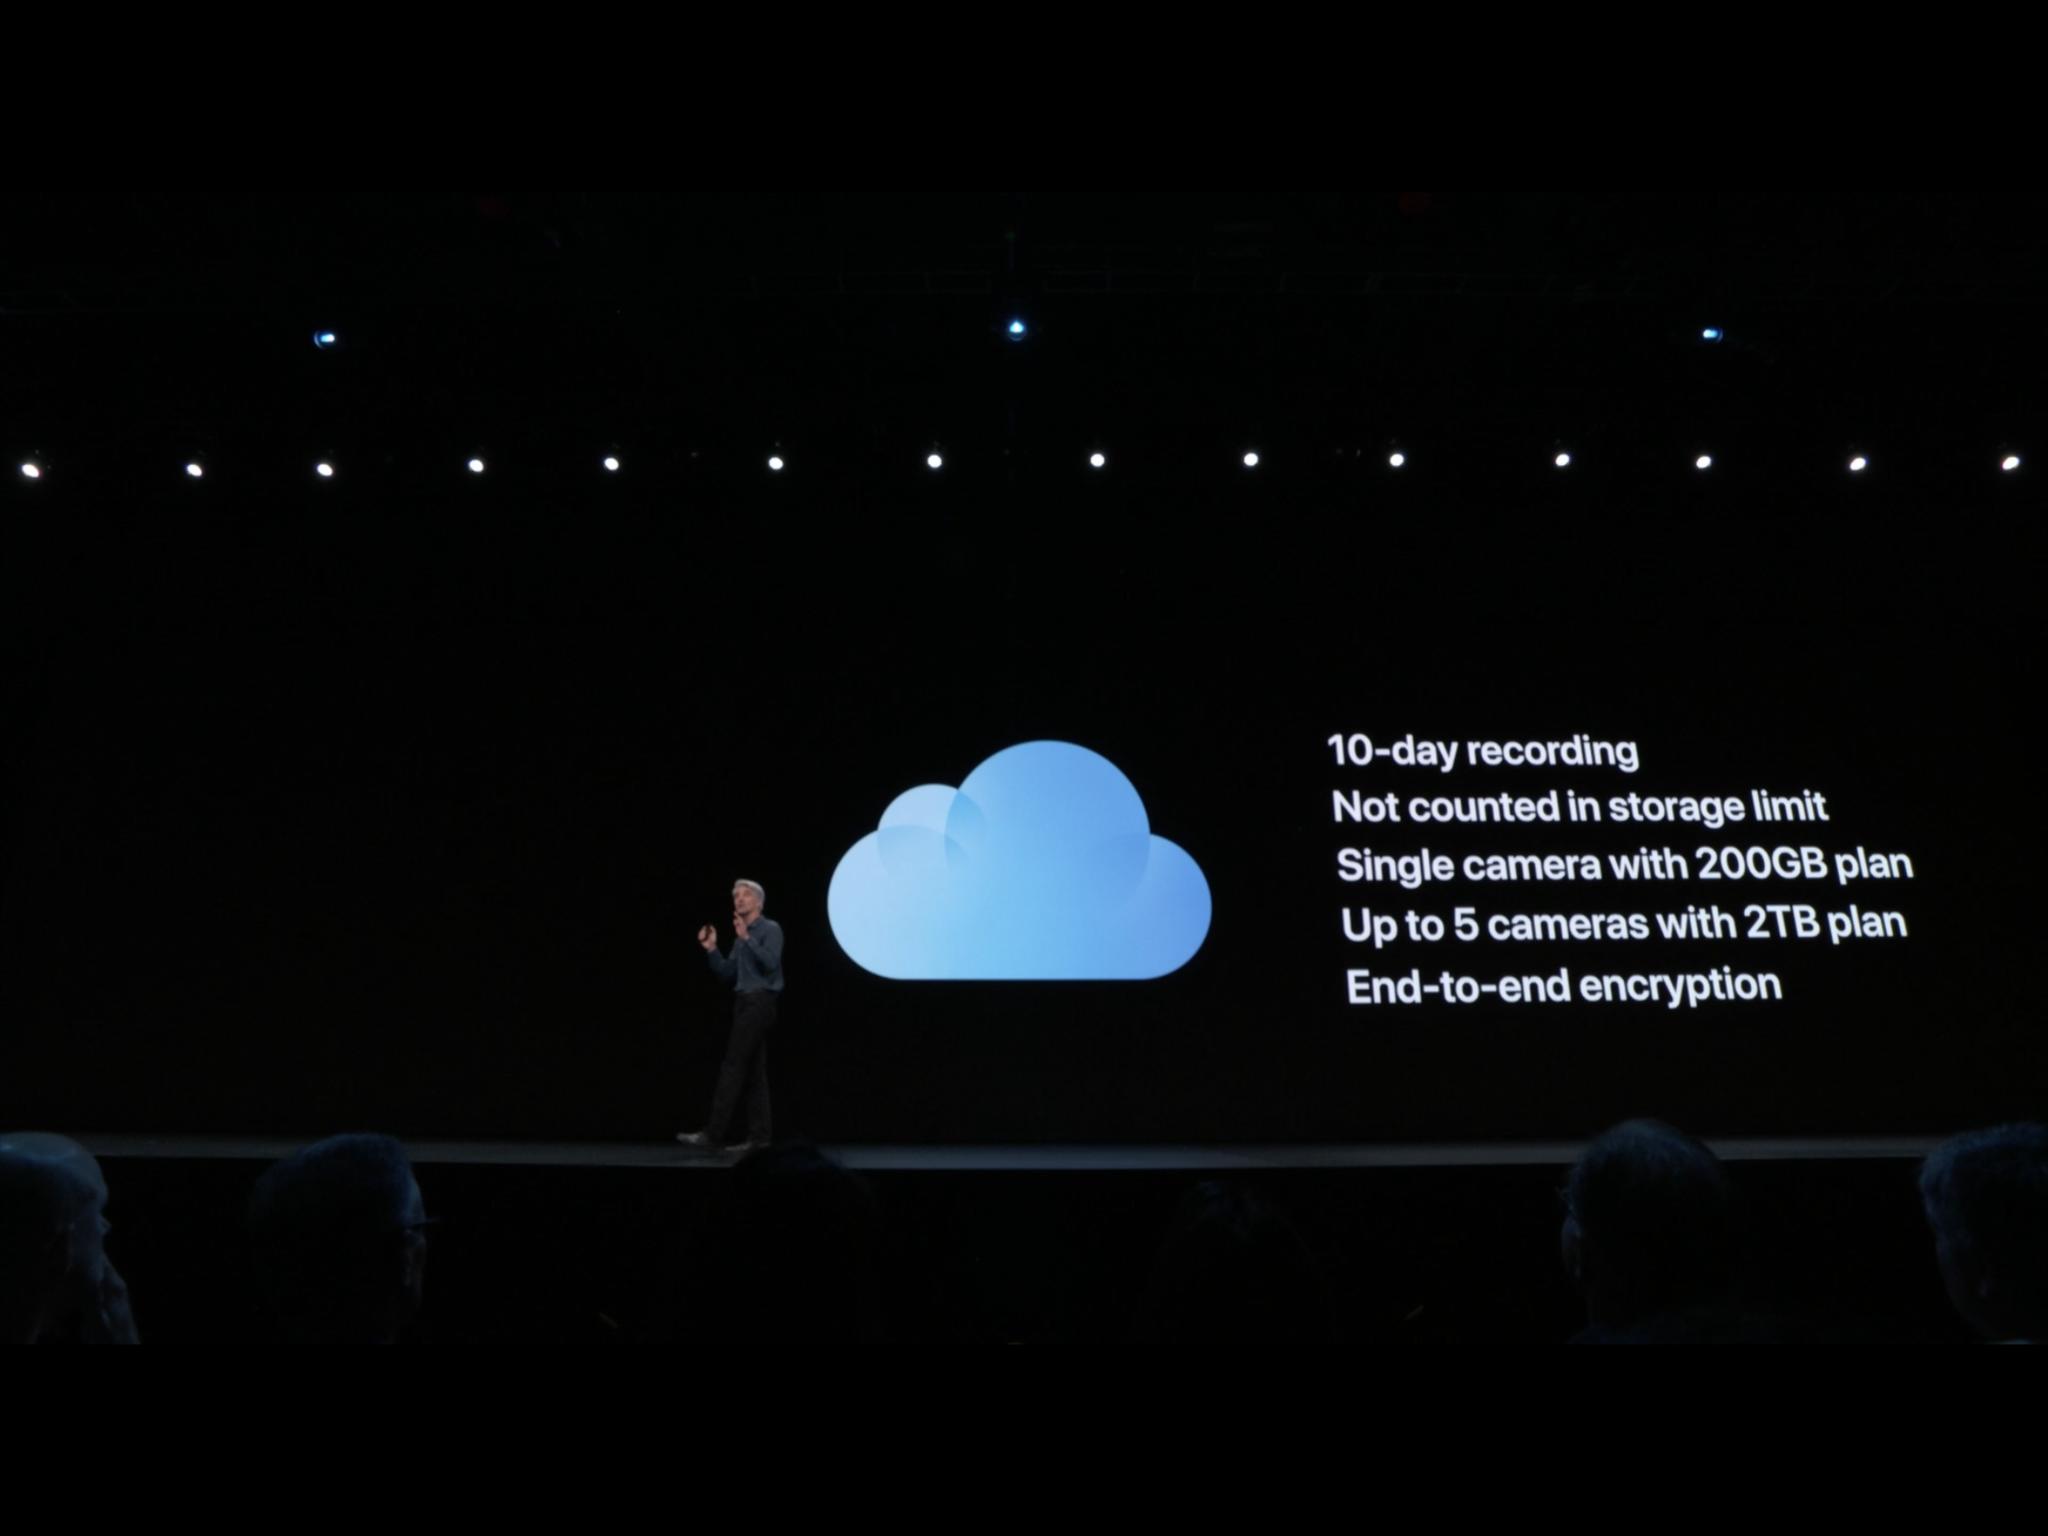 HomeKit Secure Video features announced during WWDC 2019 Keynote